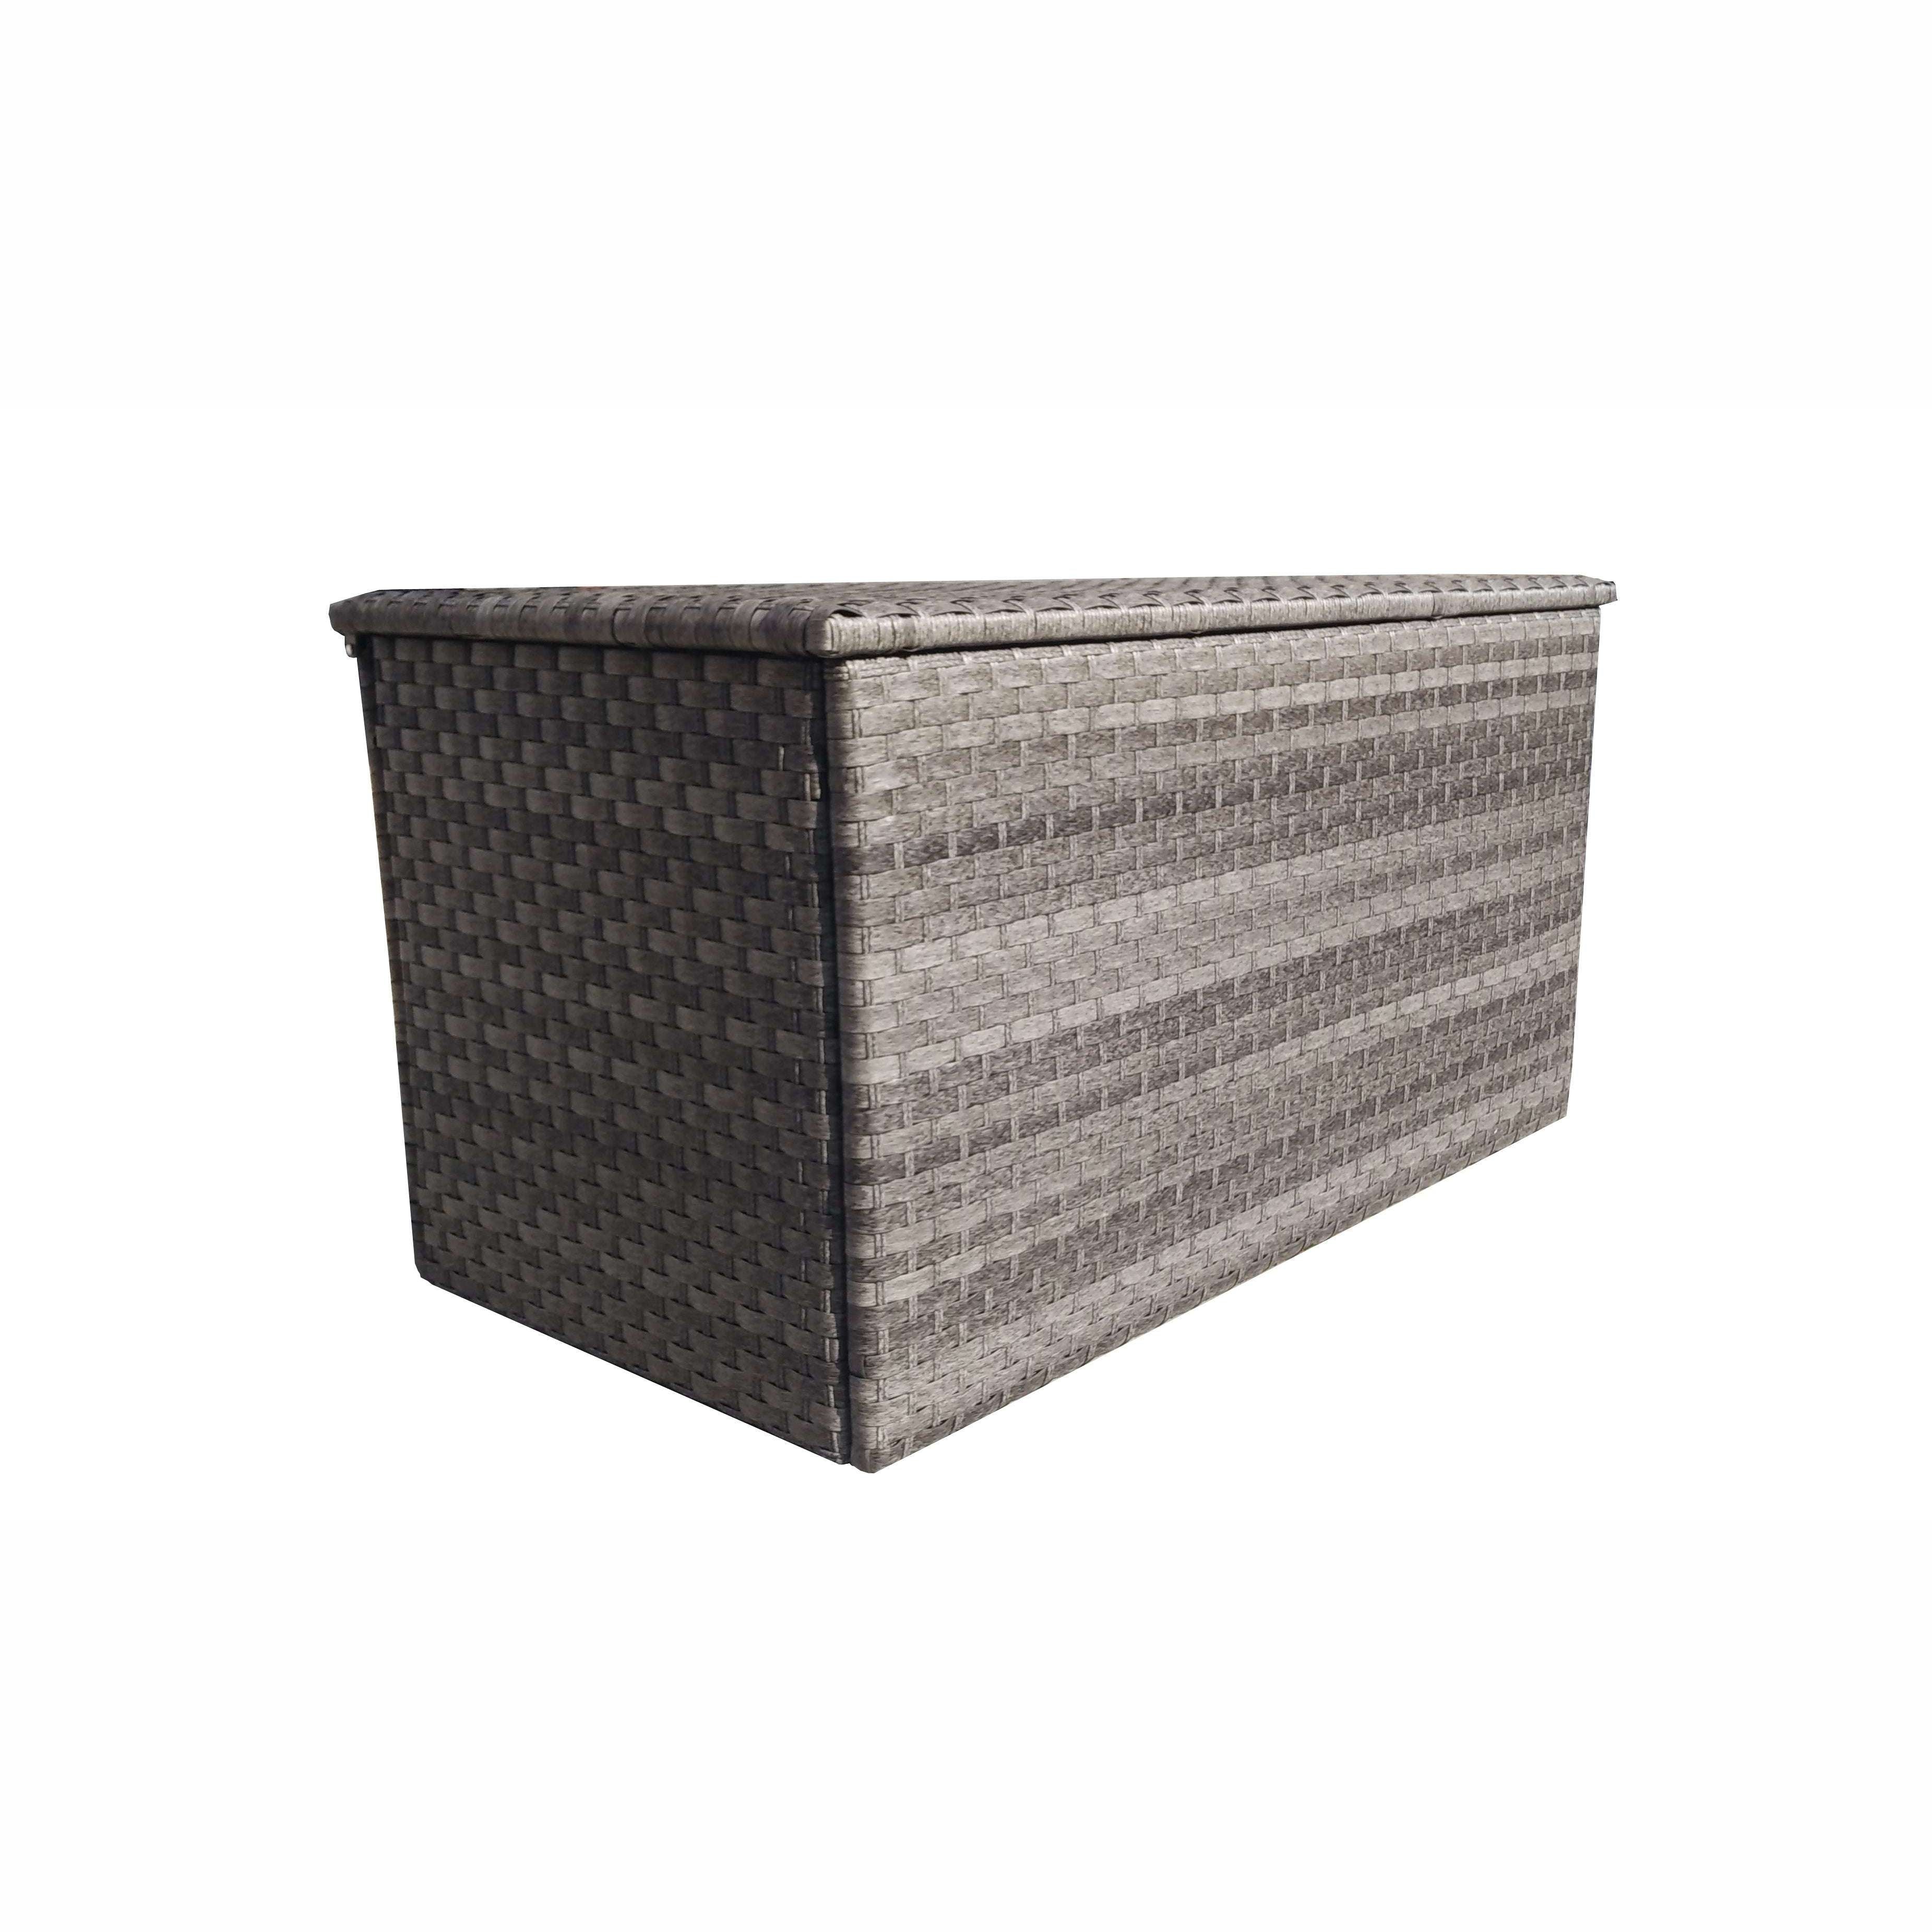 Exceptional Garden:Signature Weave Cushion Box Large